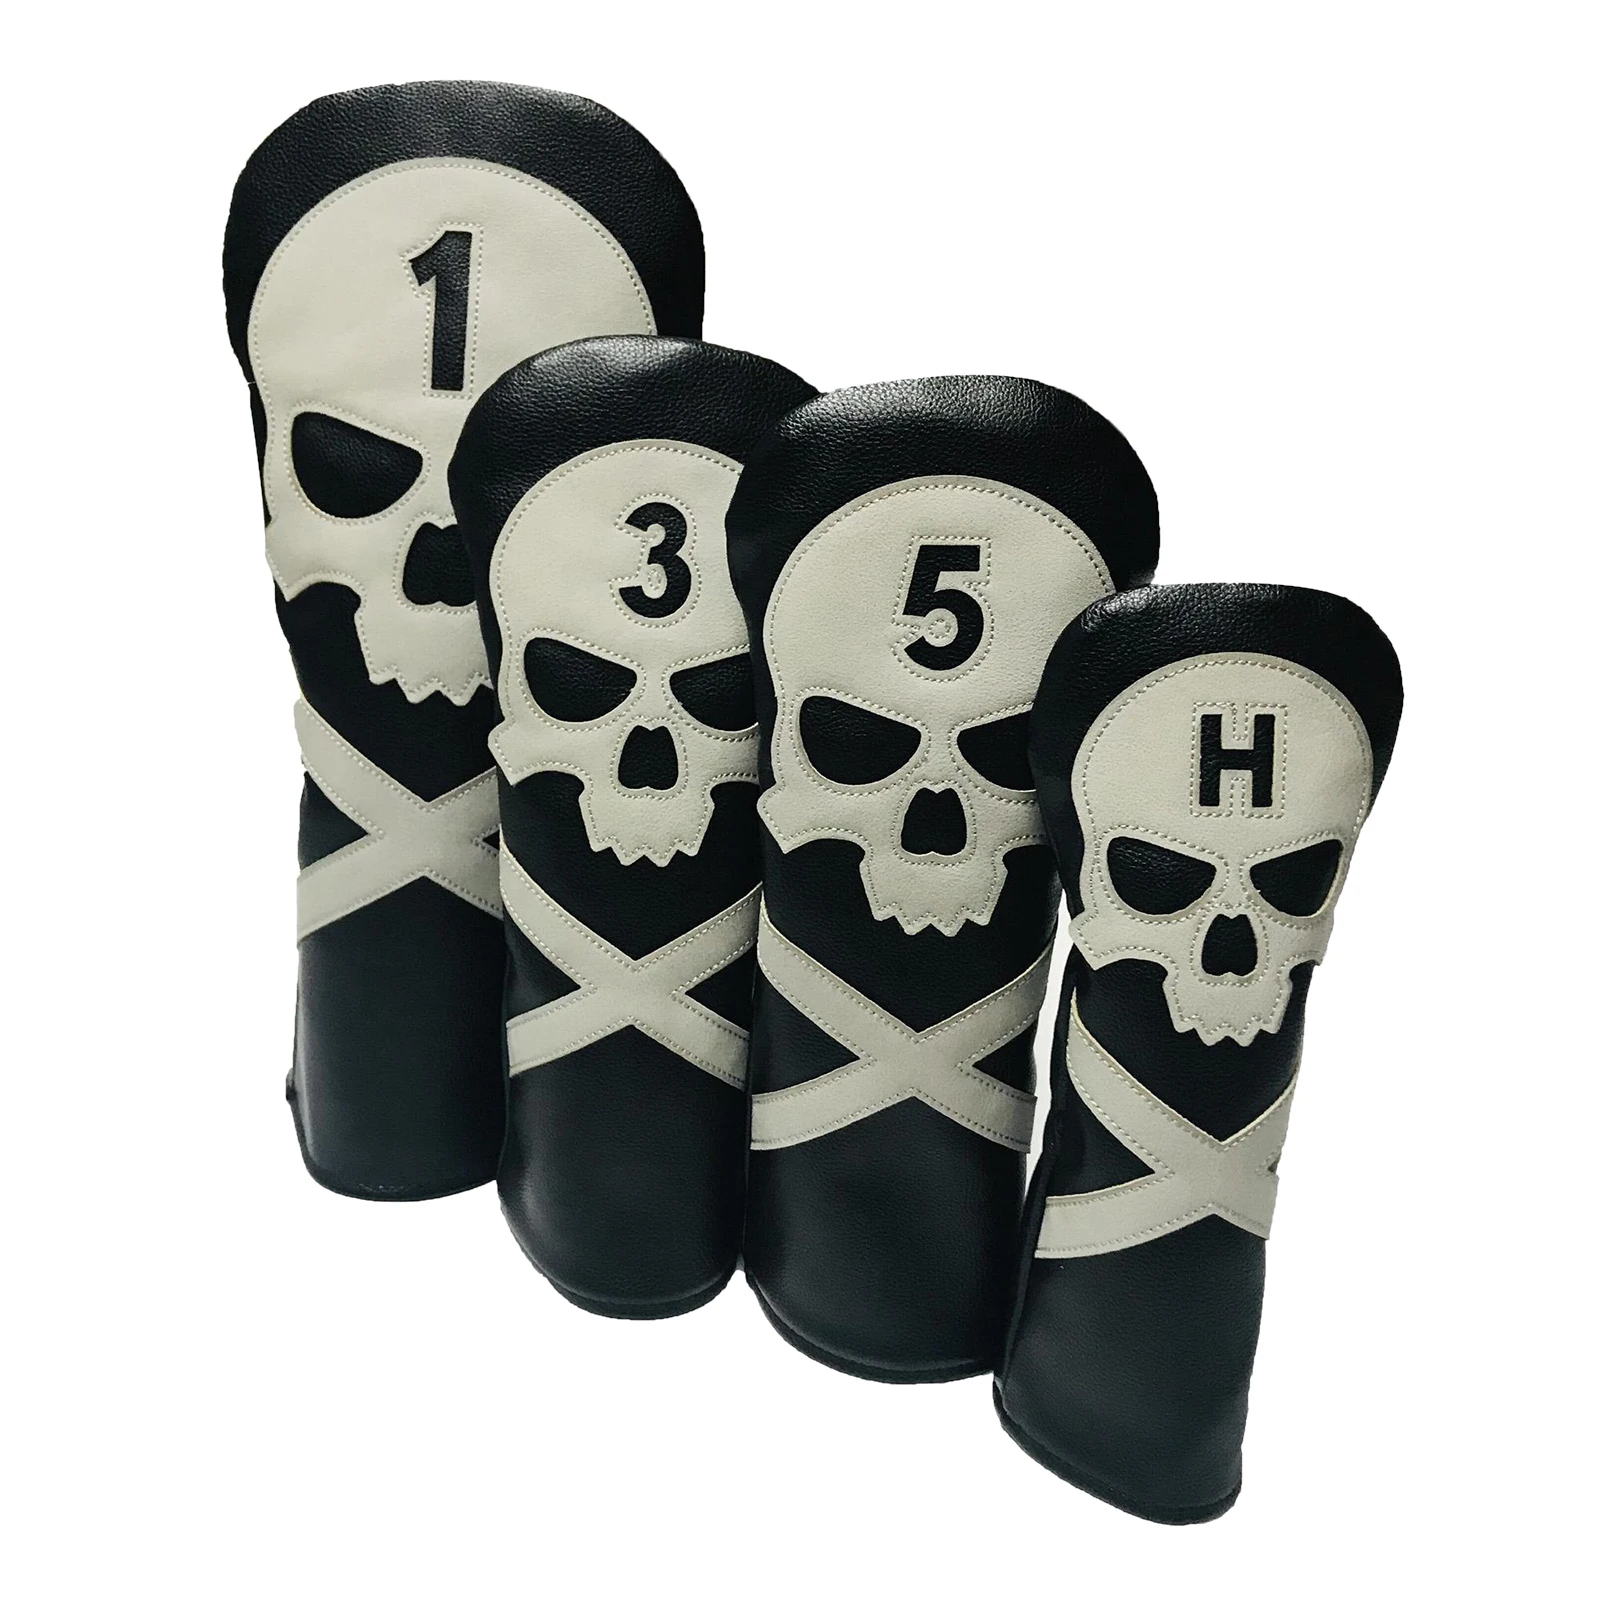 4 Pieces PU Leather Skull Printed Golf Wood Head Cover Golf Club PU Leather Headcovers Fit Driver Fairway Wood Hybrid